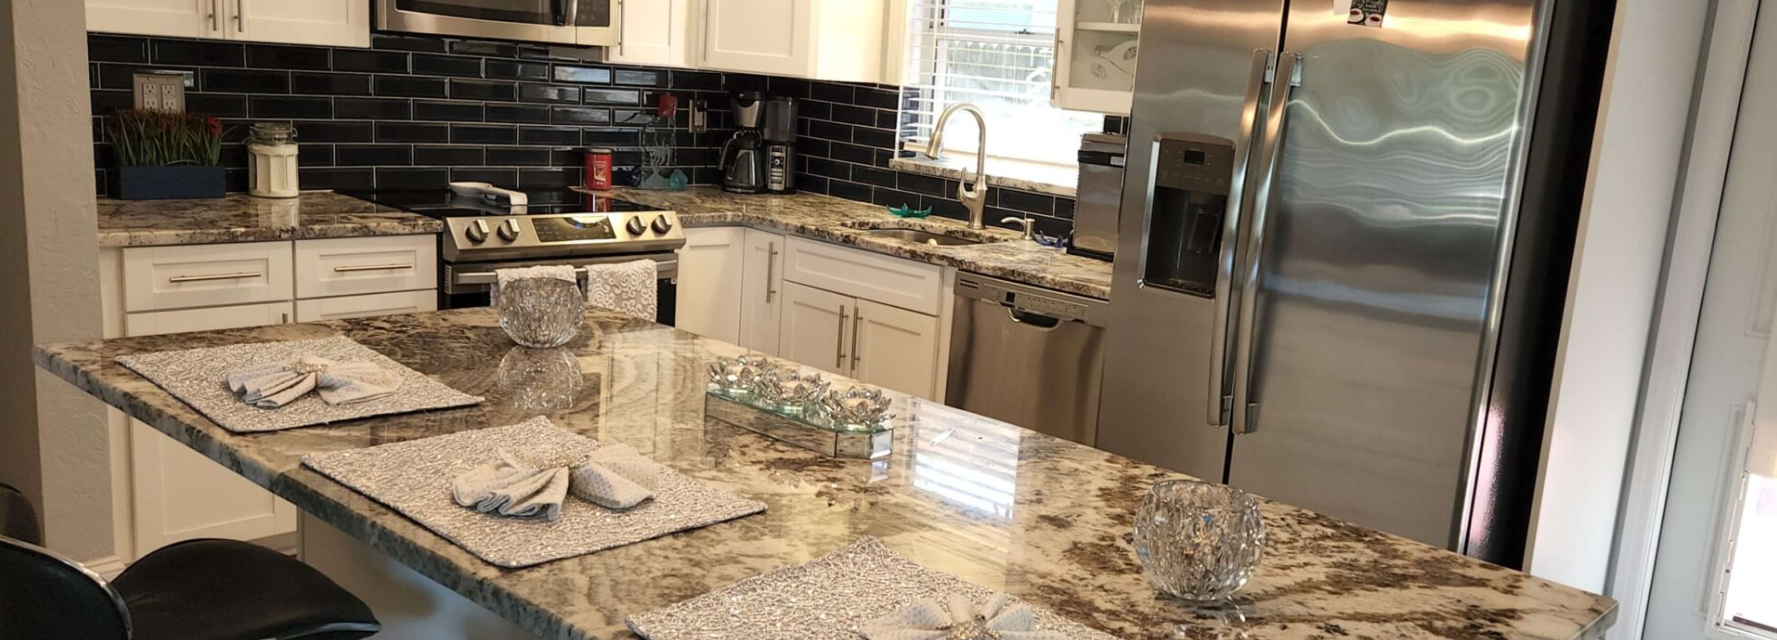 The Premier kitchen remodeler Turning Old Spaces Into New Havens in Tampa, FL